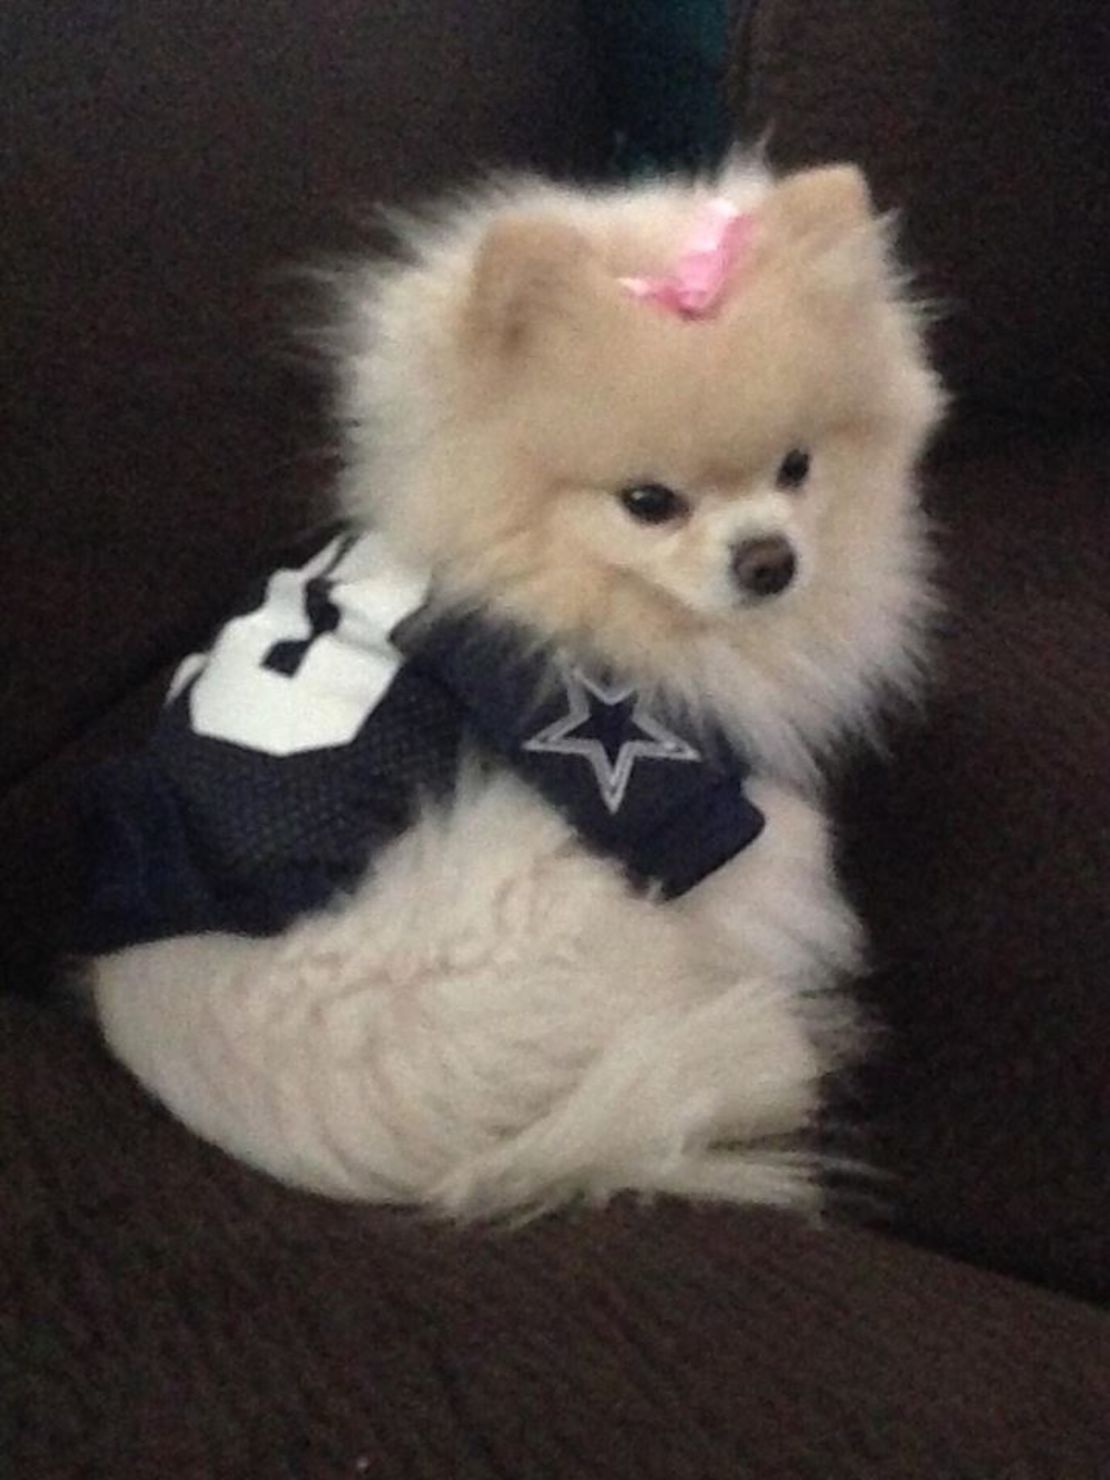 Jana Owen's dog in Cowboys outfit.